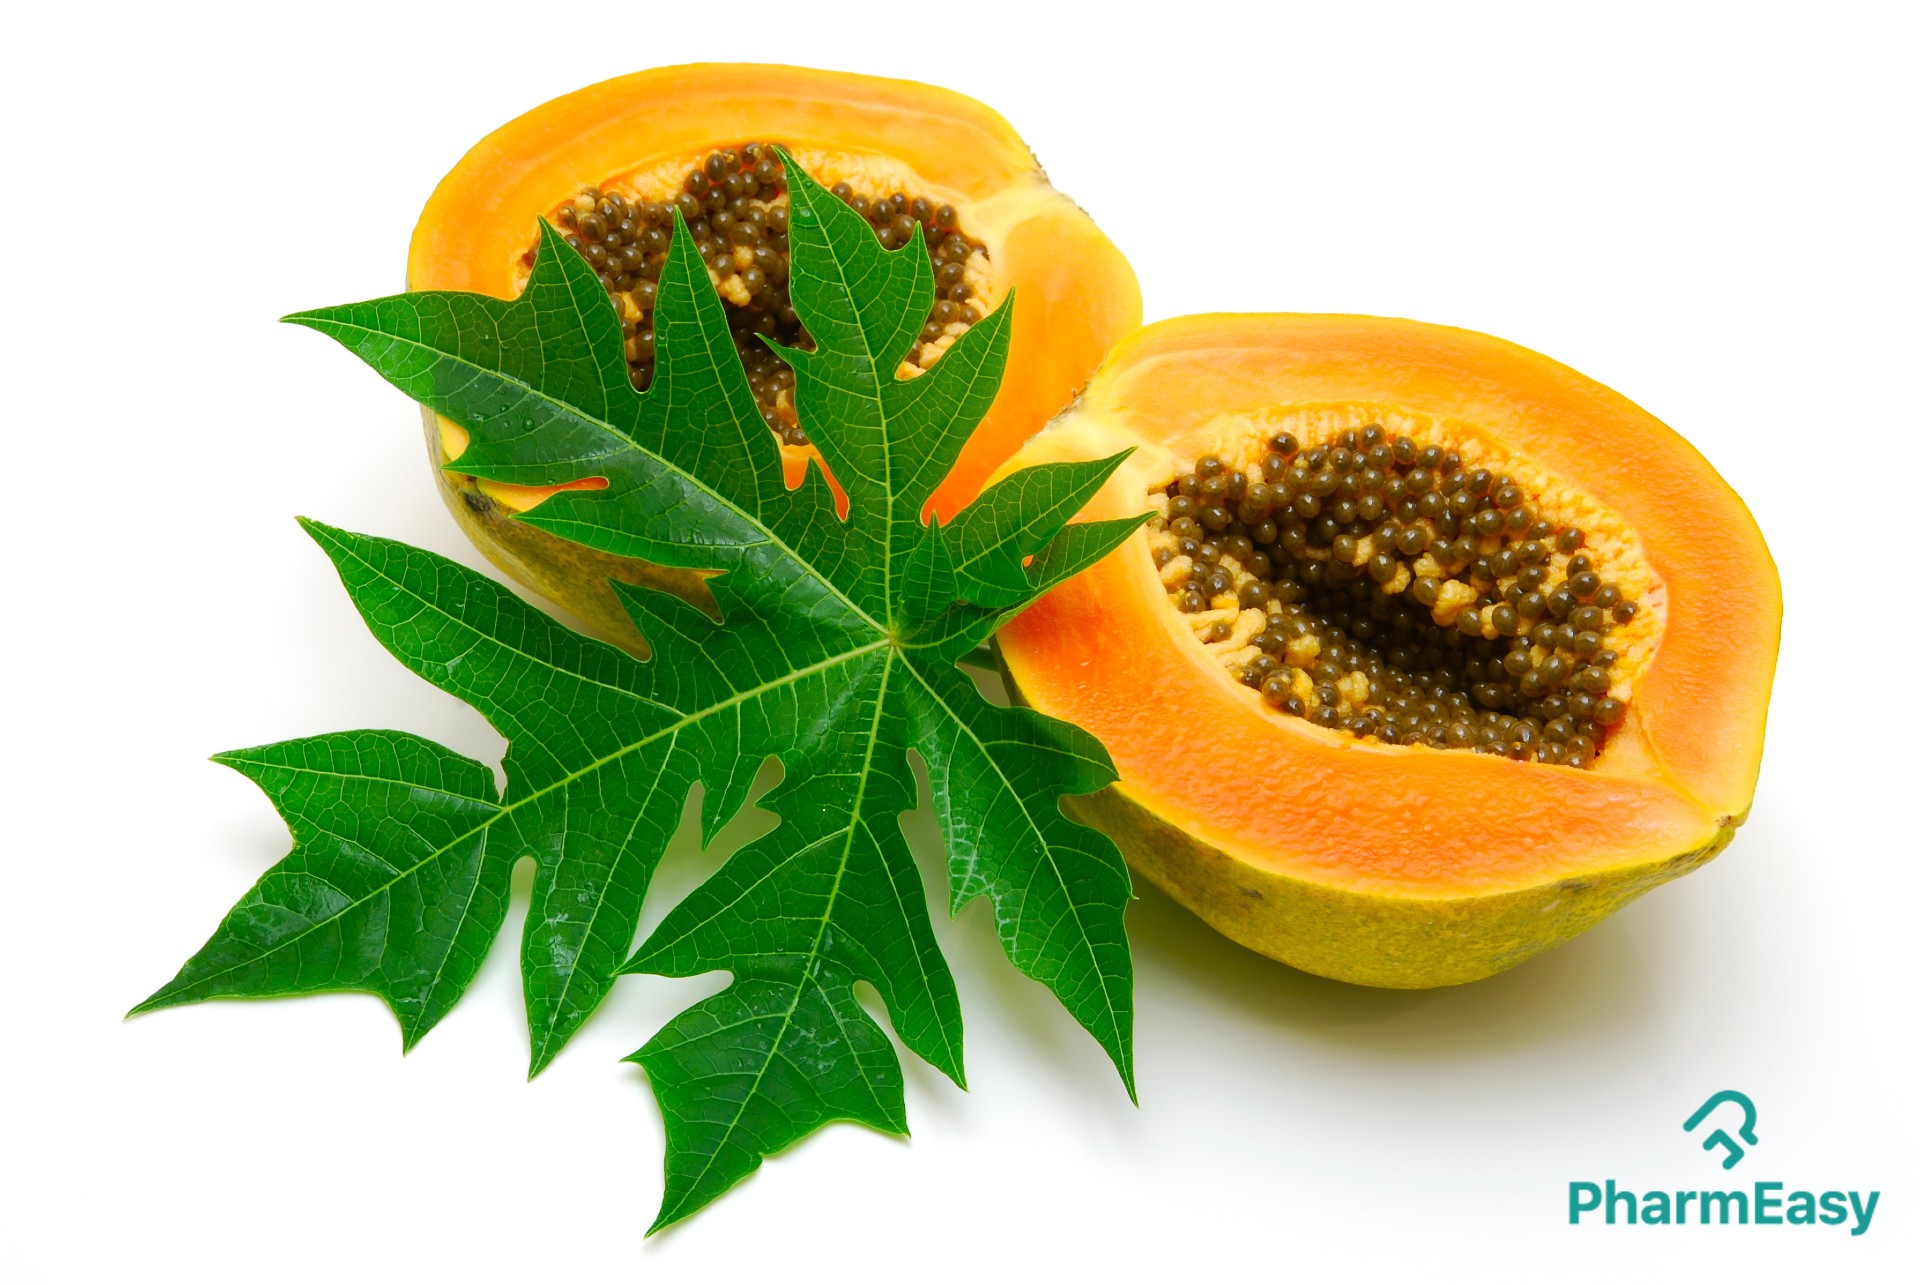 Papaya Leaves And Seeds To Treat Fever And Other Ailments - PharmEasy Blog